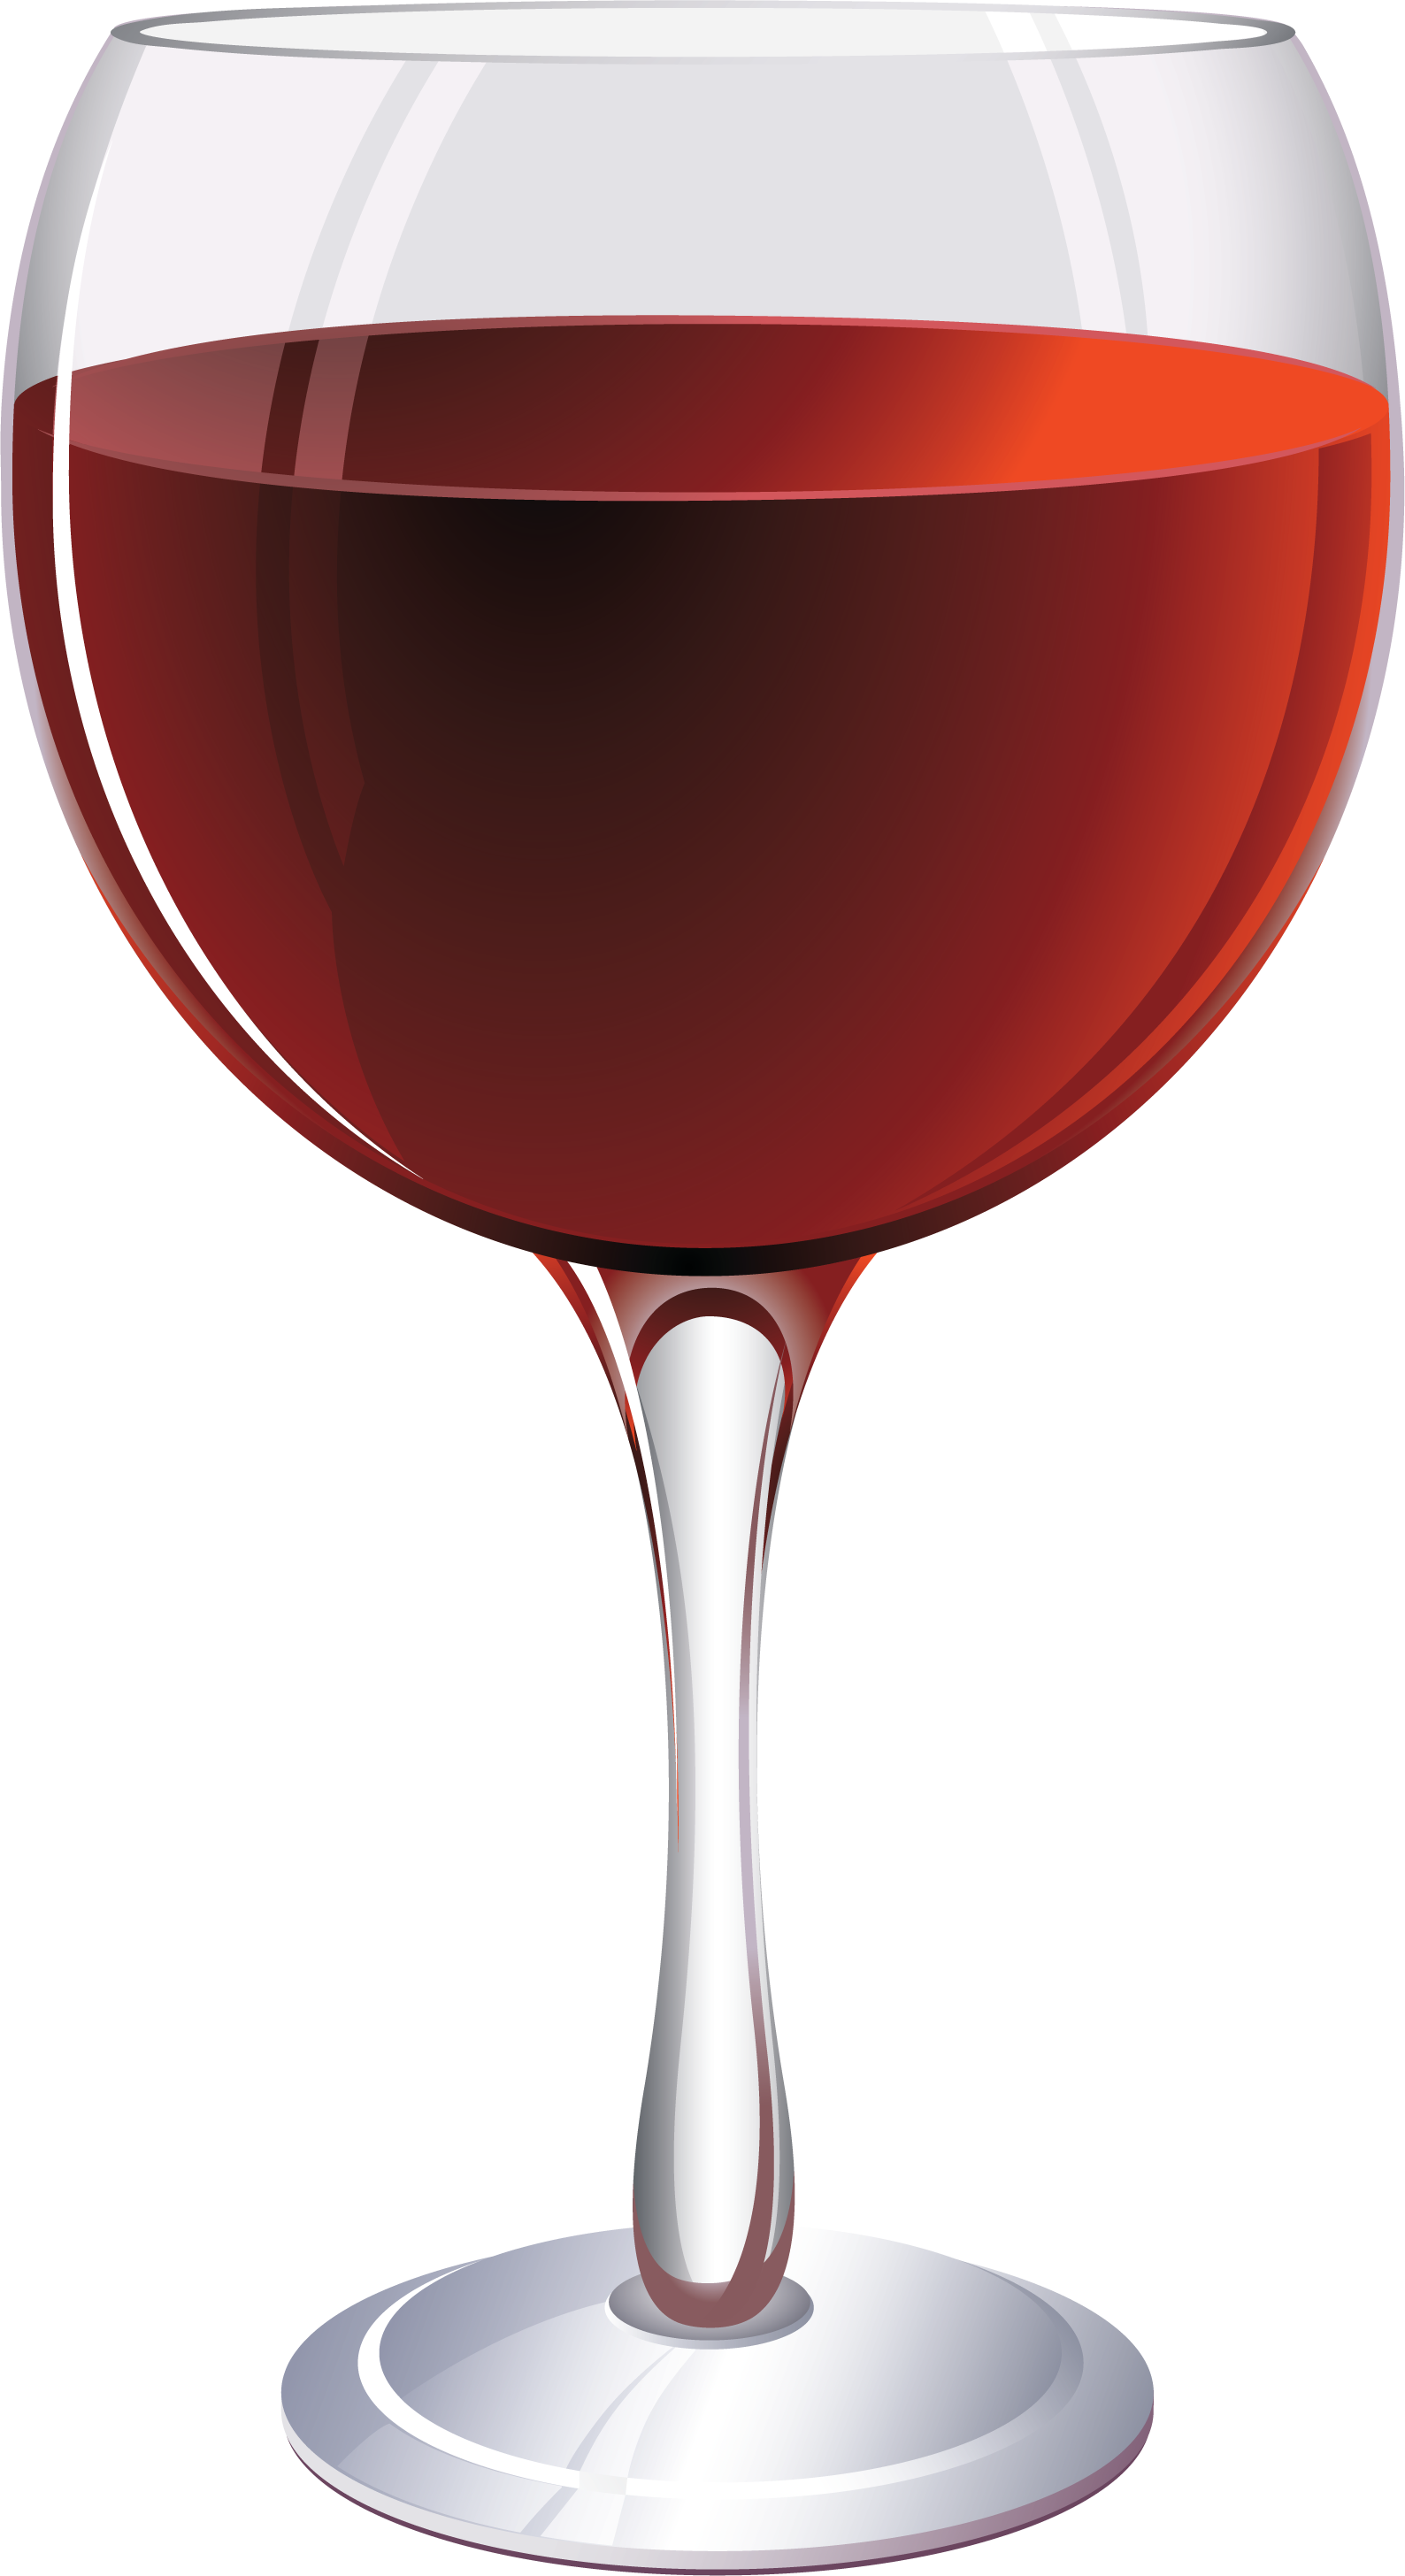 https://www.freeiconspng.com/uploads/wine-glass-png-clipart-0.png